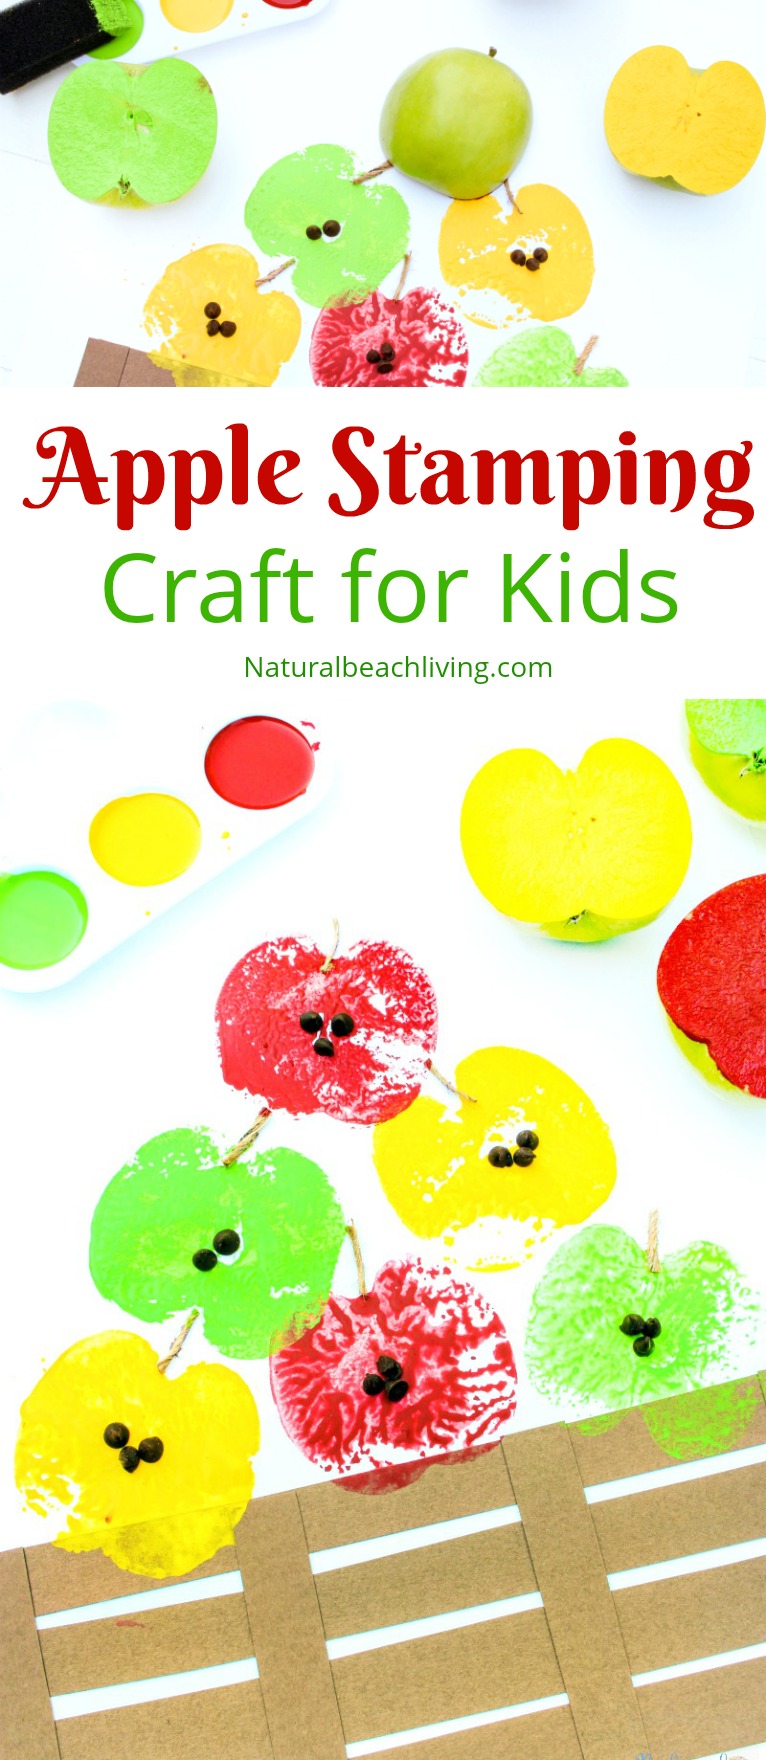 How to Make The Most Adorable Apple Stamping Craft with Kids, Apple Stamping, Apple Activities, Apple Crafts, Apple theme for preschoolers, Fall Crafts, Art